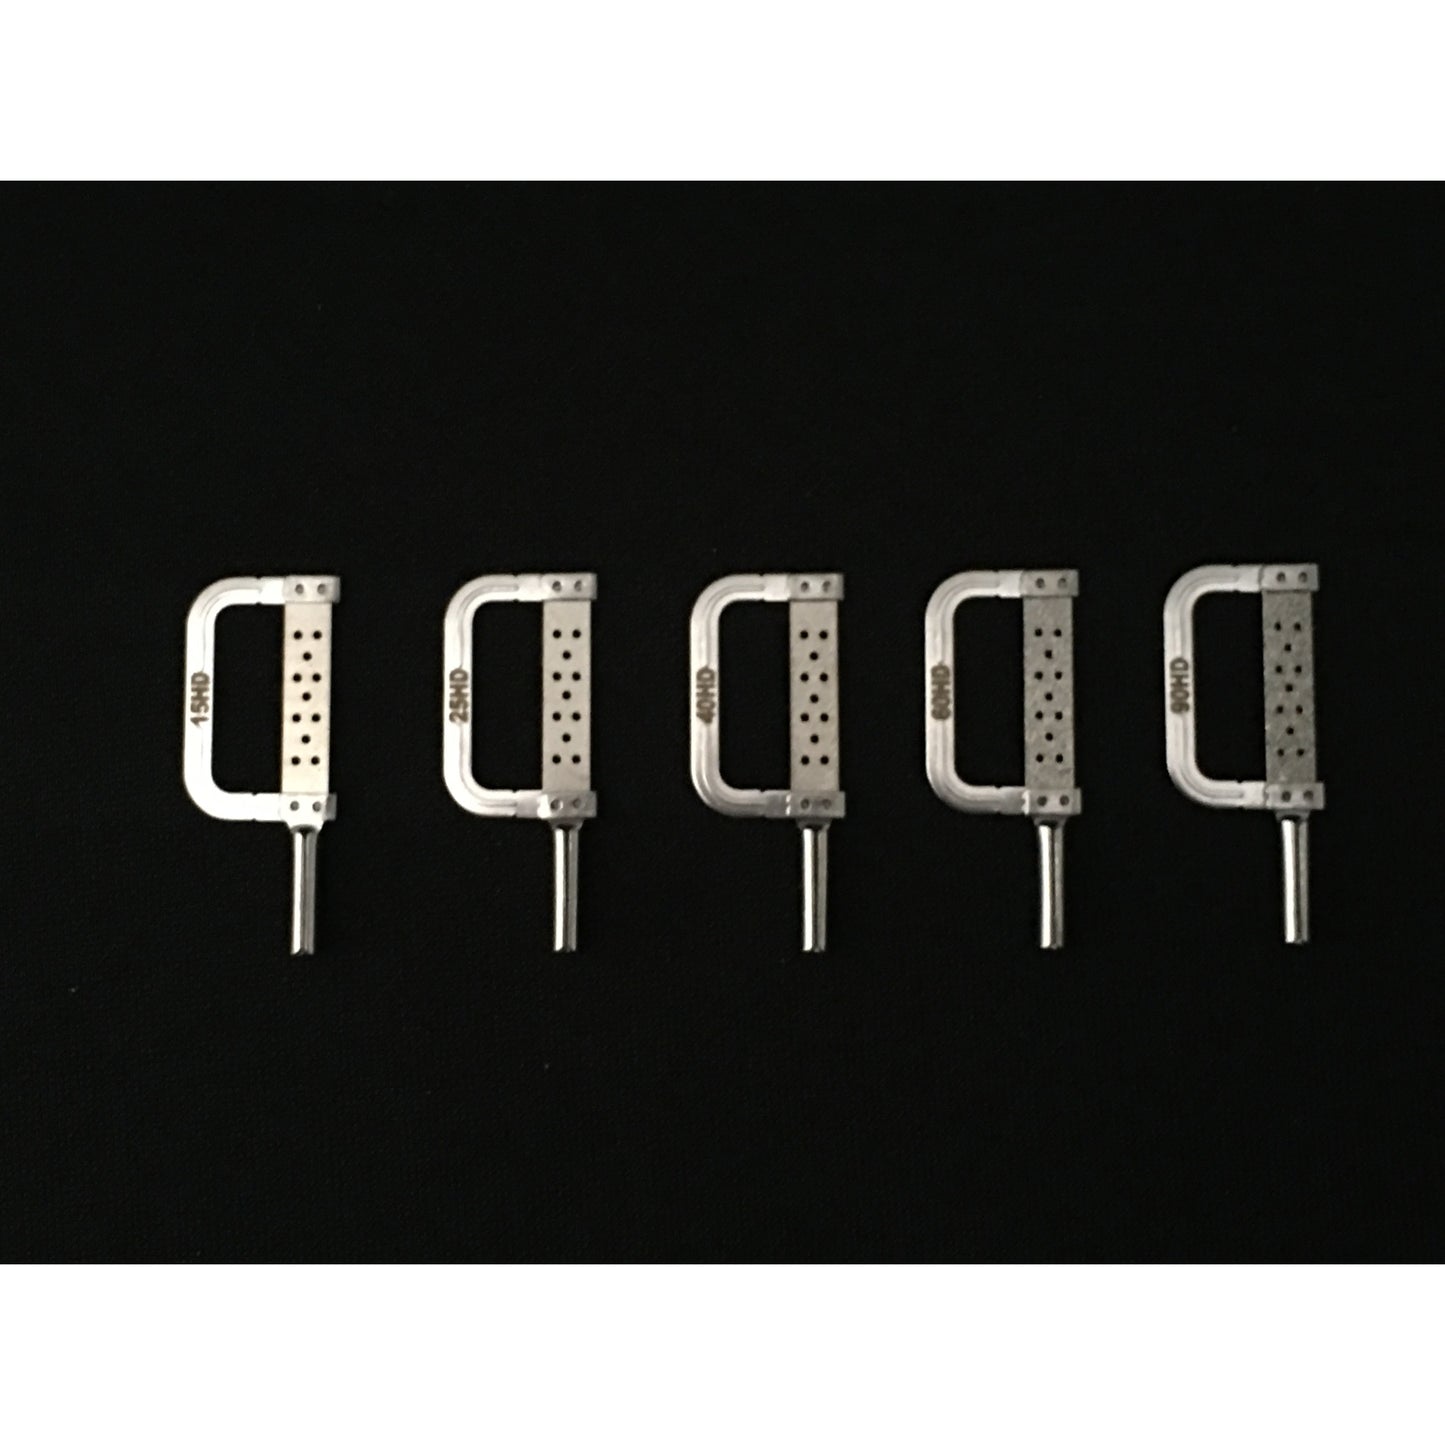 IPR Adapter Replacement Blades (5 per Pack)